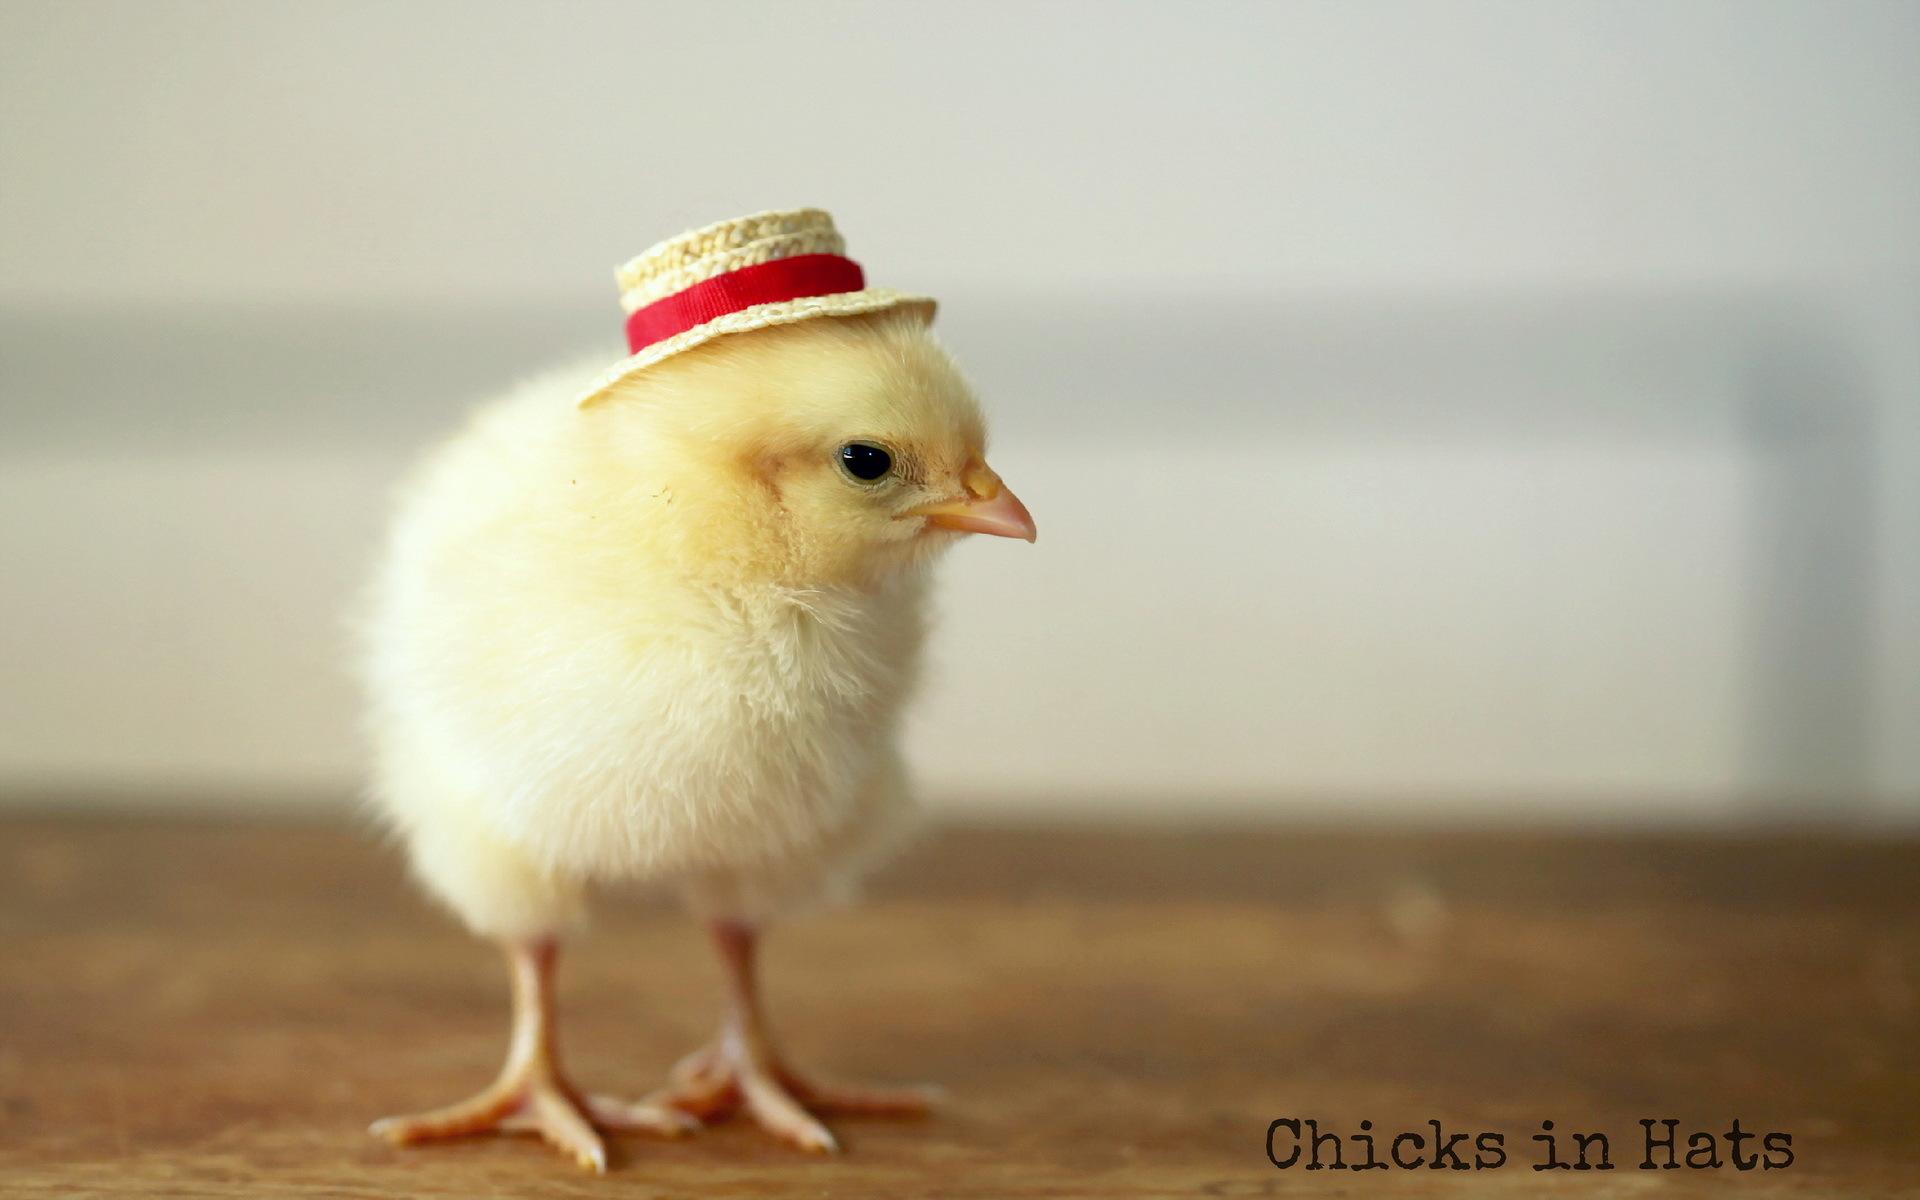 Cute chick with a straw hat wallpaper